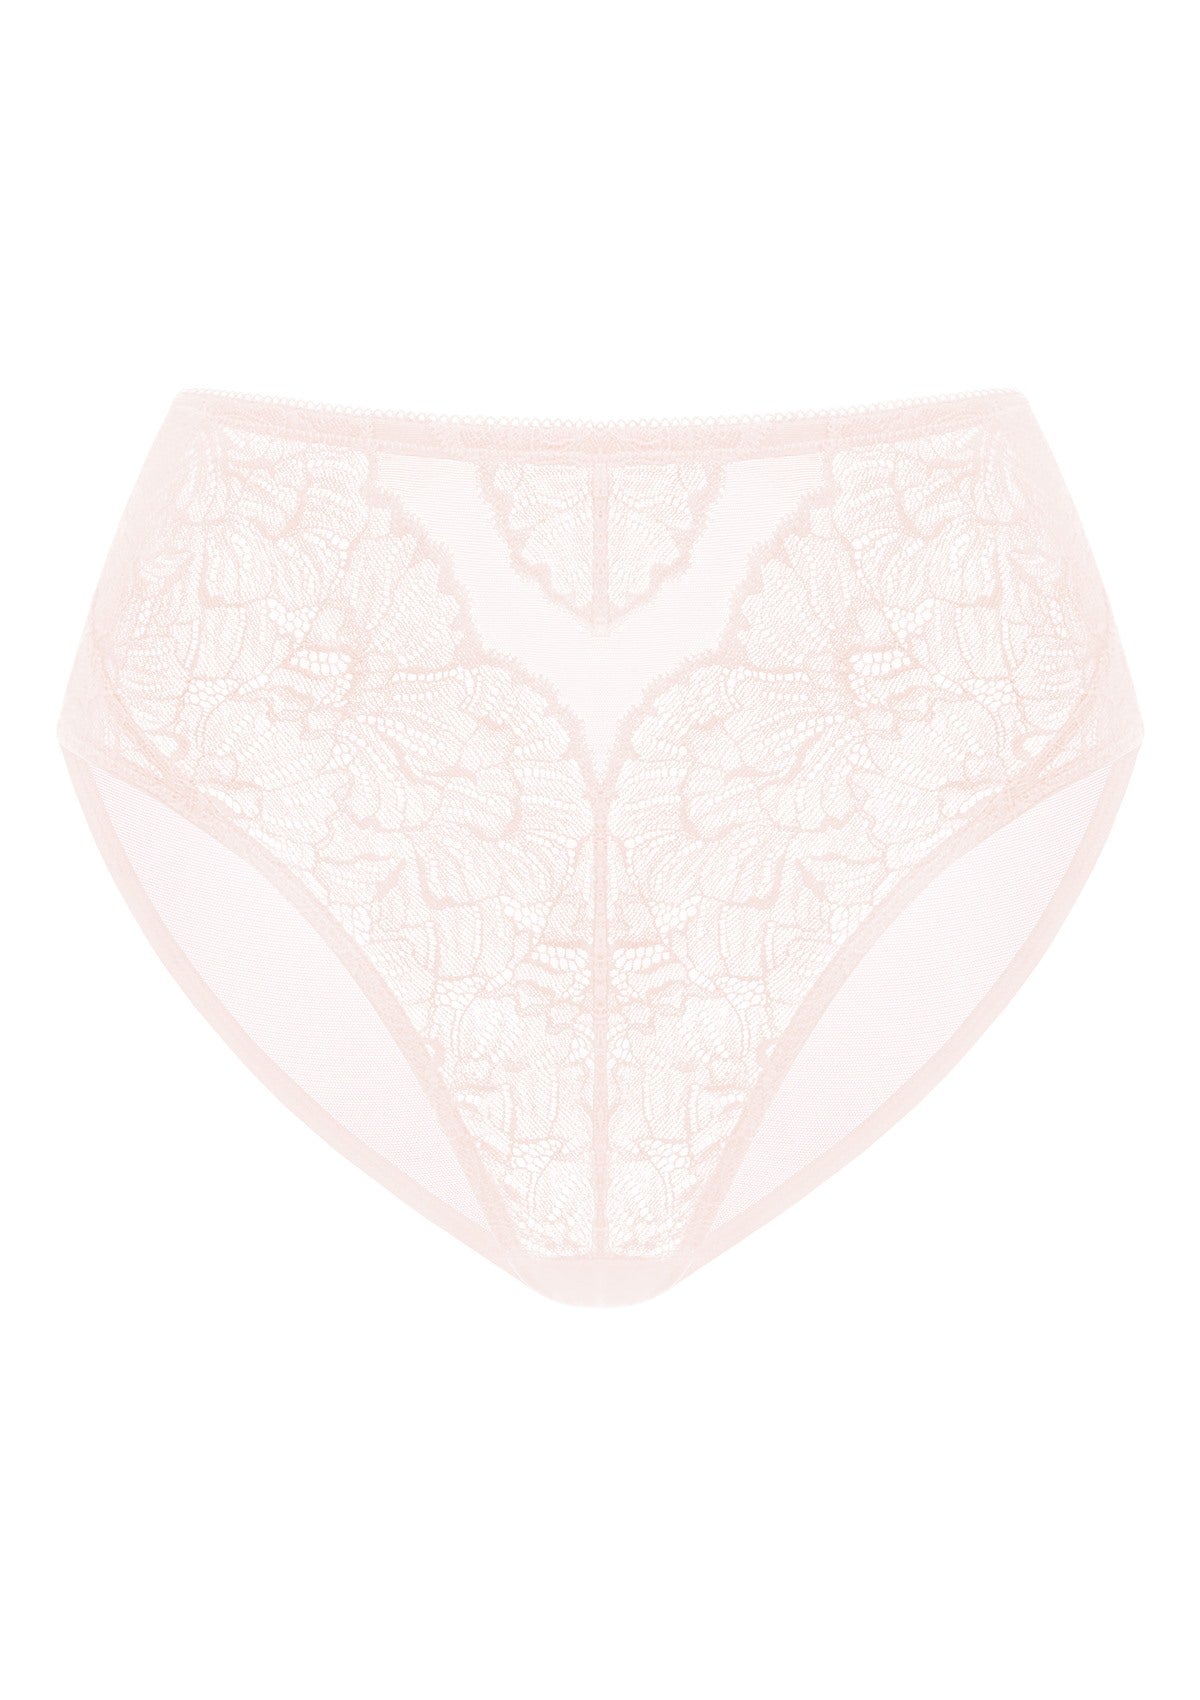 HSIA Blossom High-Rise Floral Lacy Panty-Comfort In Style - L / Dusty Peach